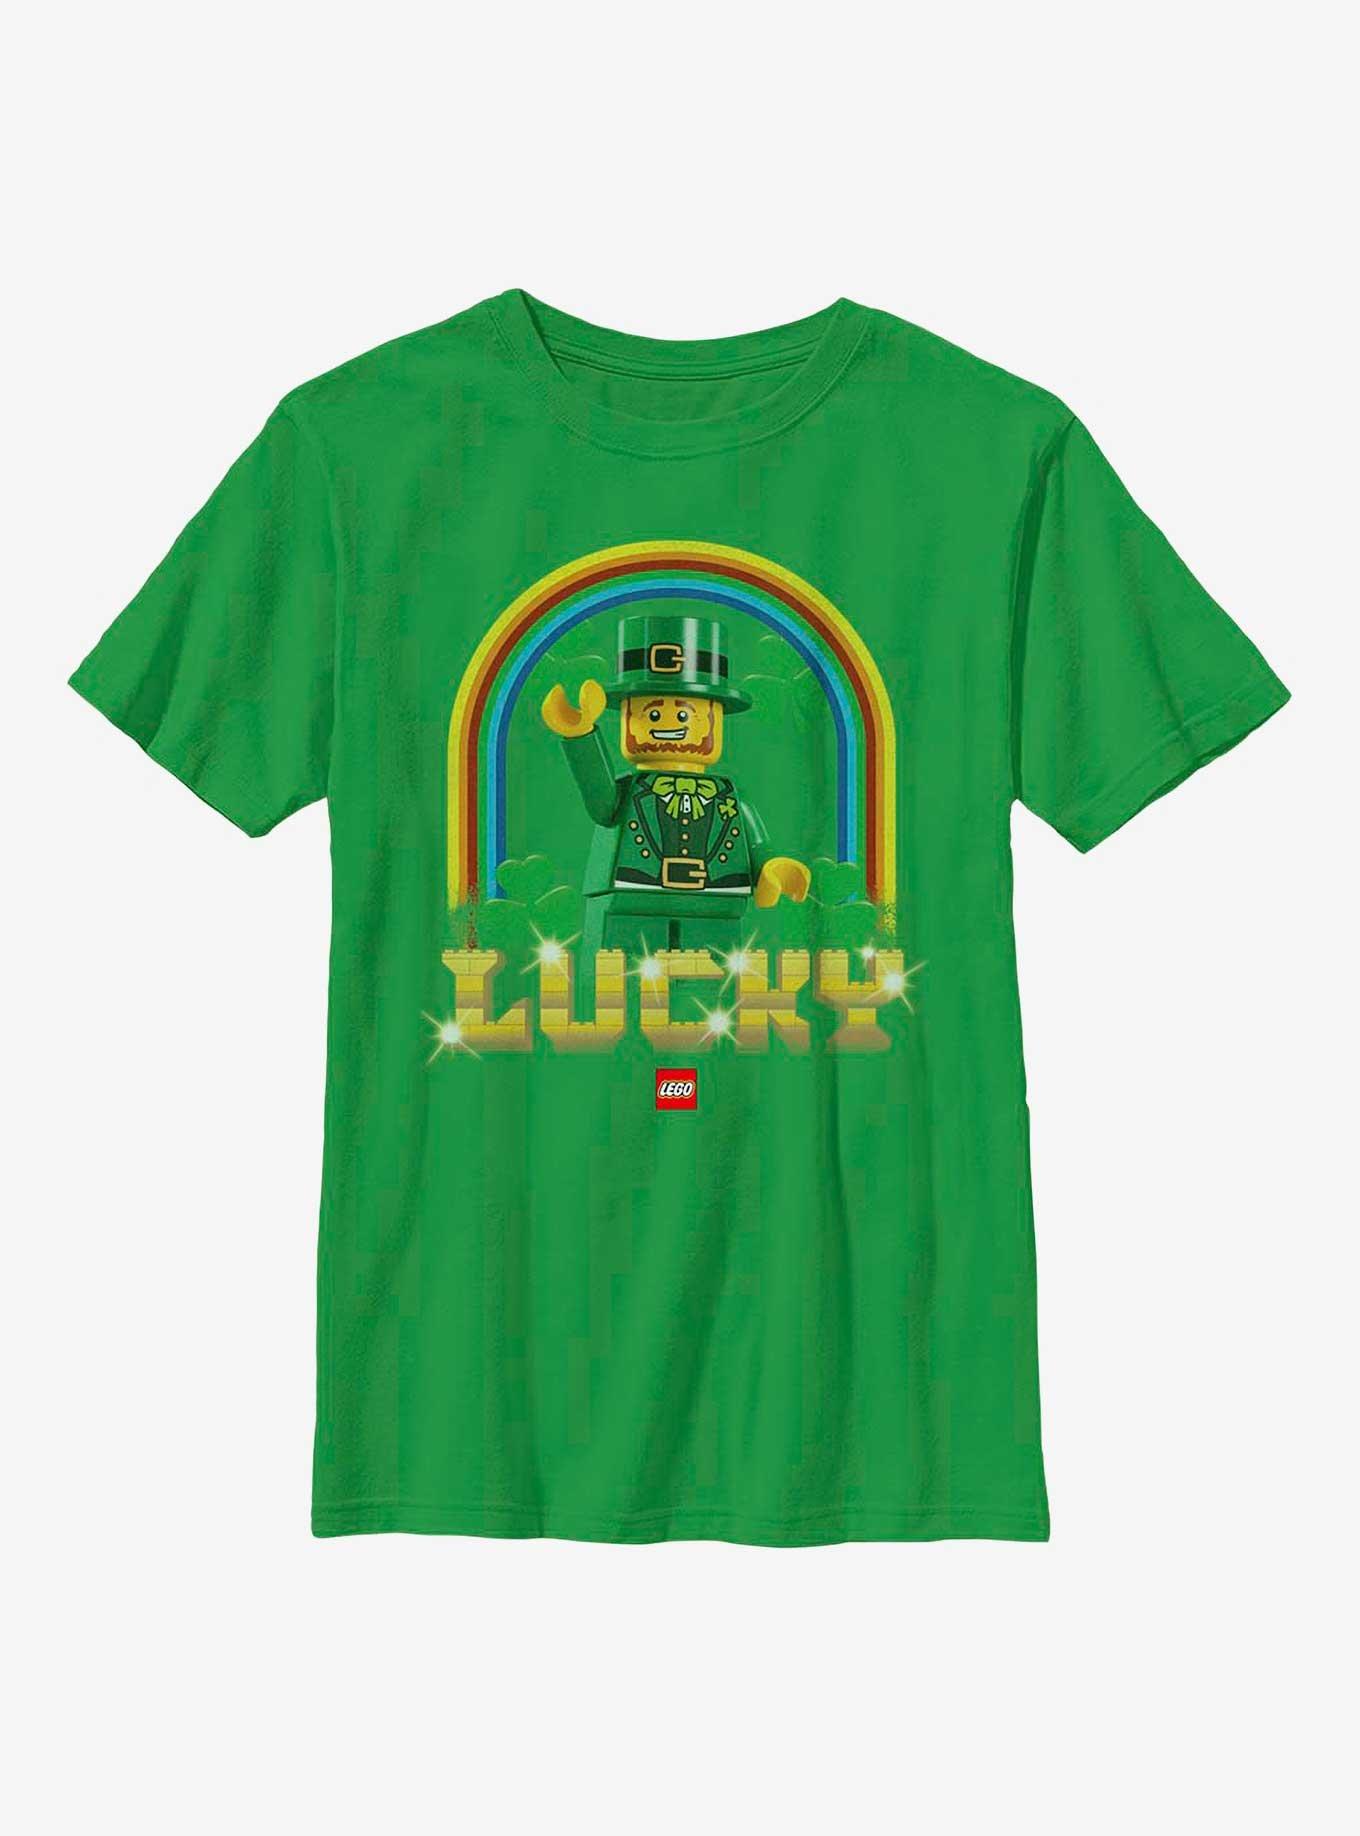 Raining - Luck Youth BoxLunch | LEGO T-Shirt Iconic GREEN